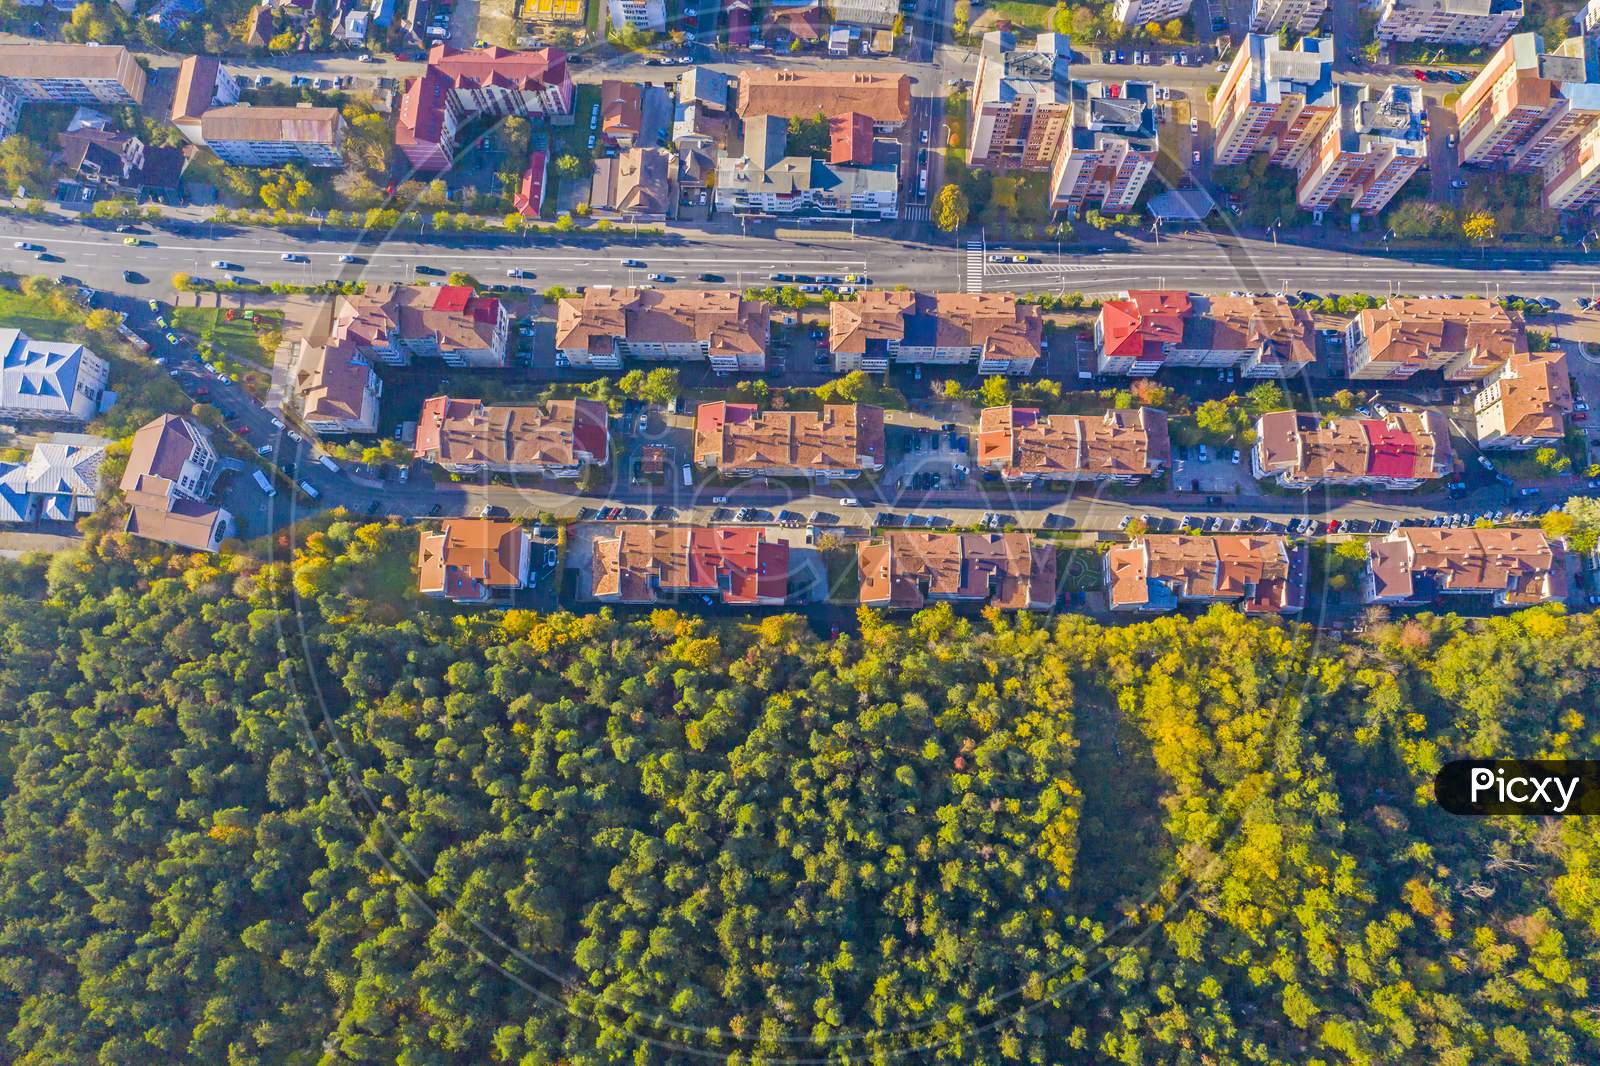 Residential Buildings  Near Forest Viewed From Above